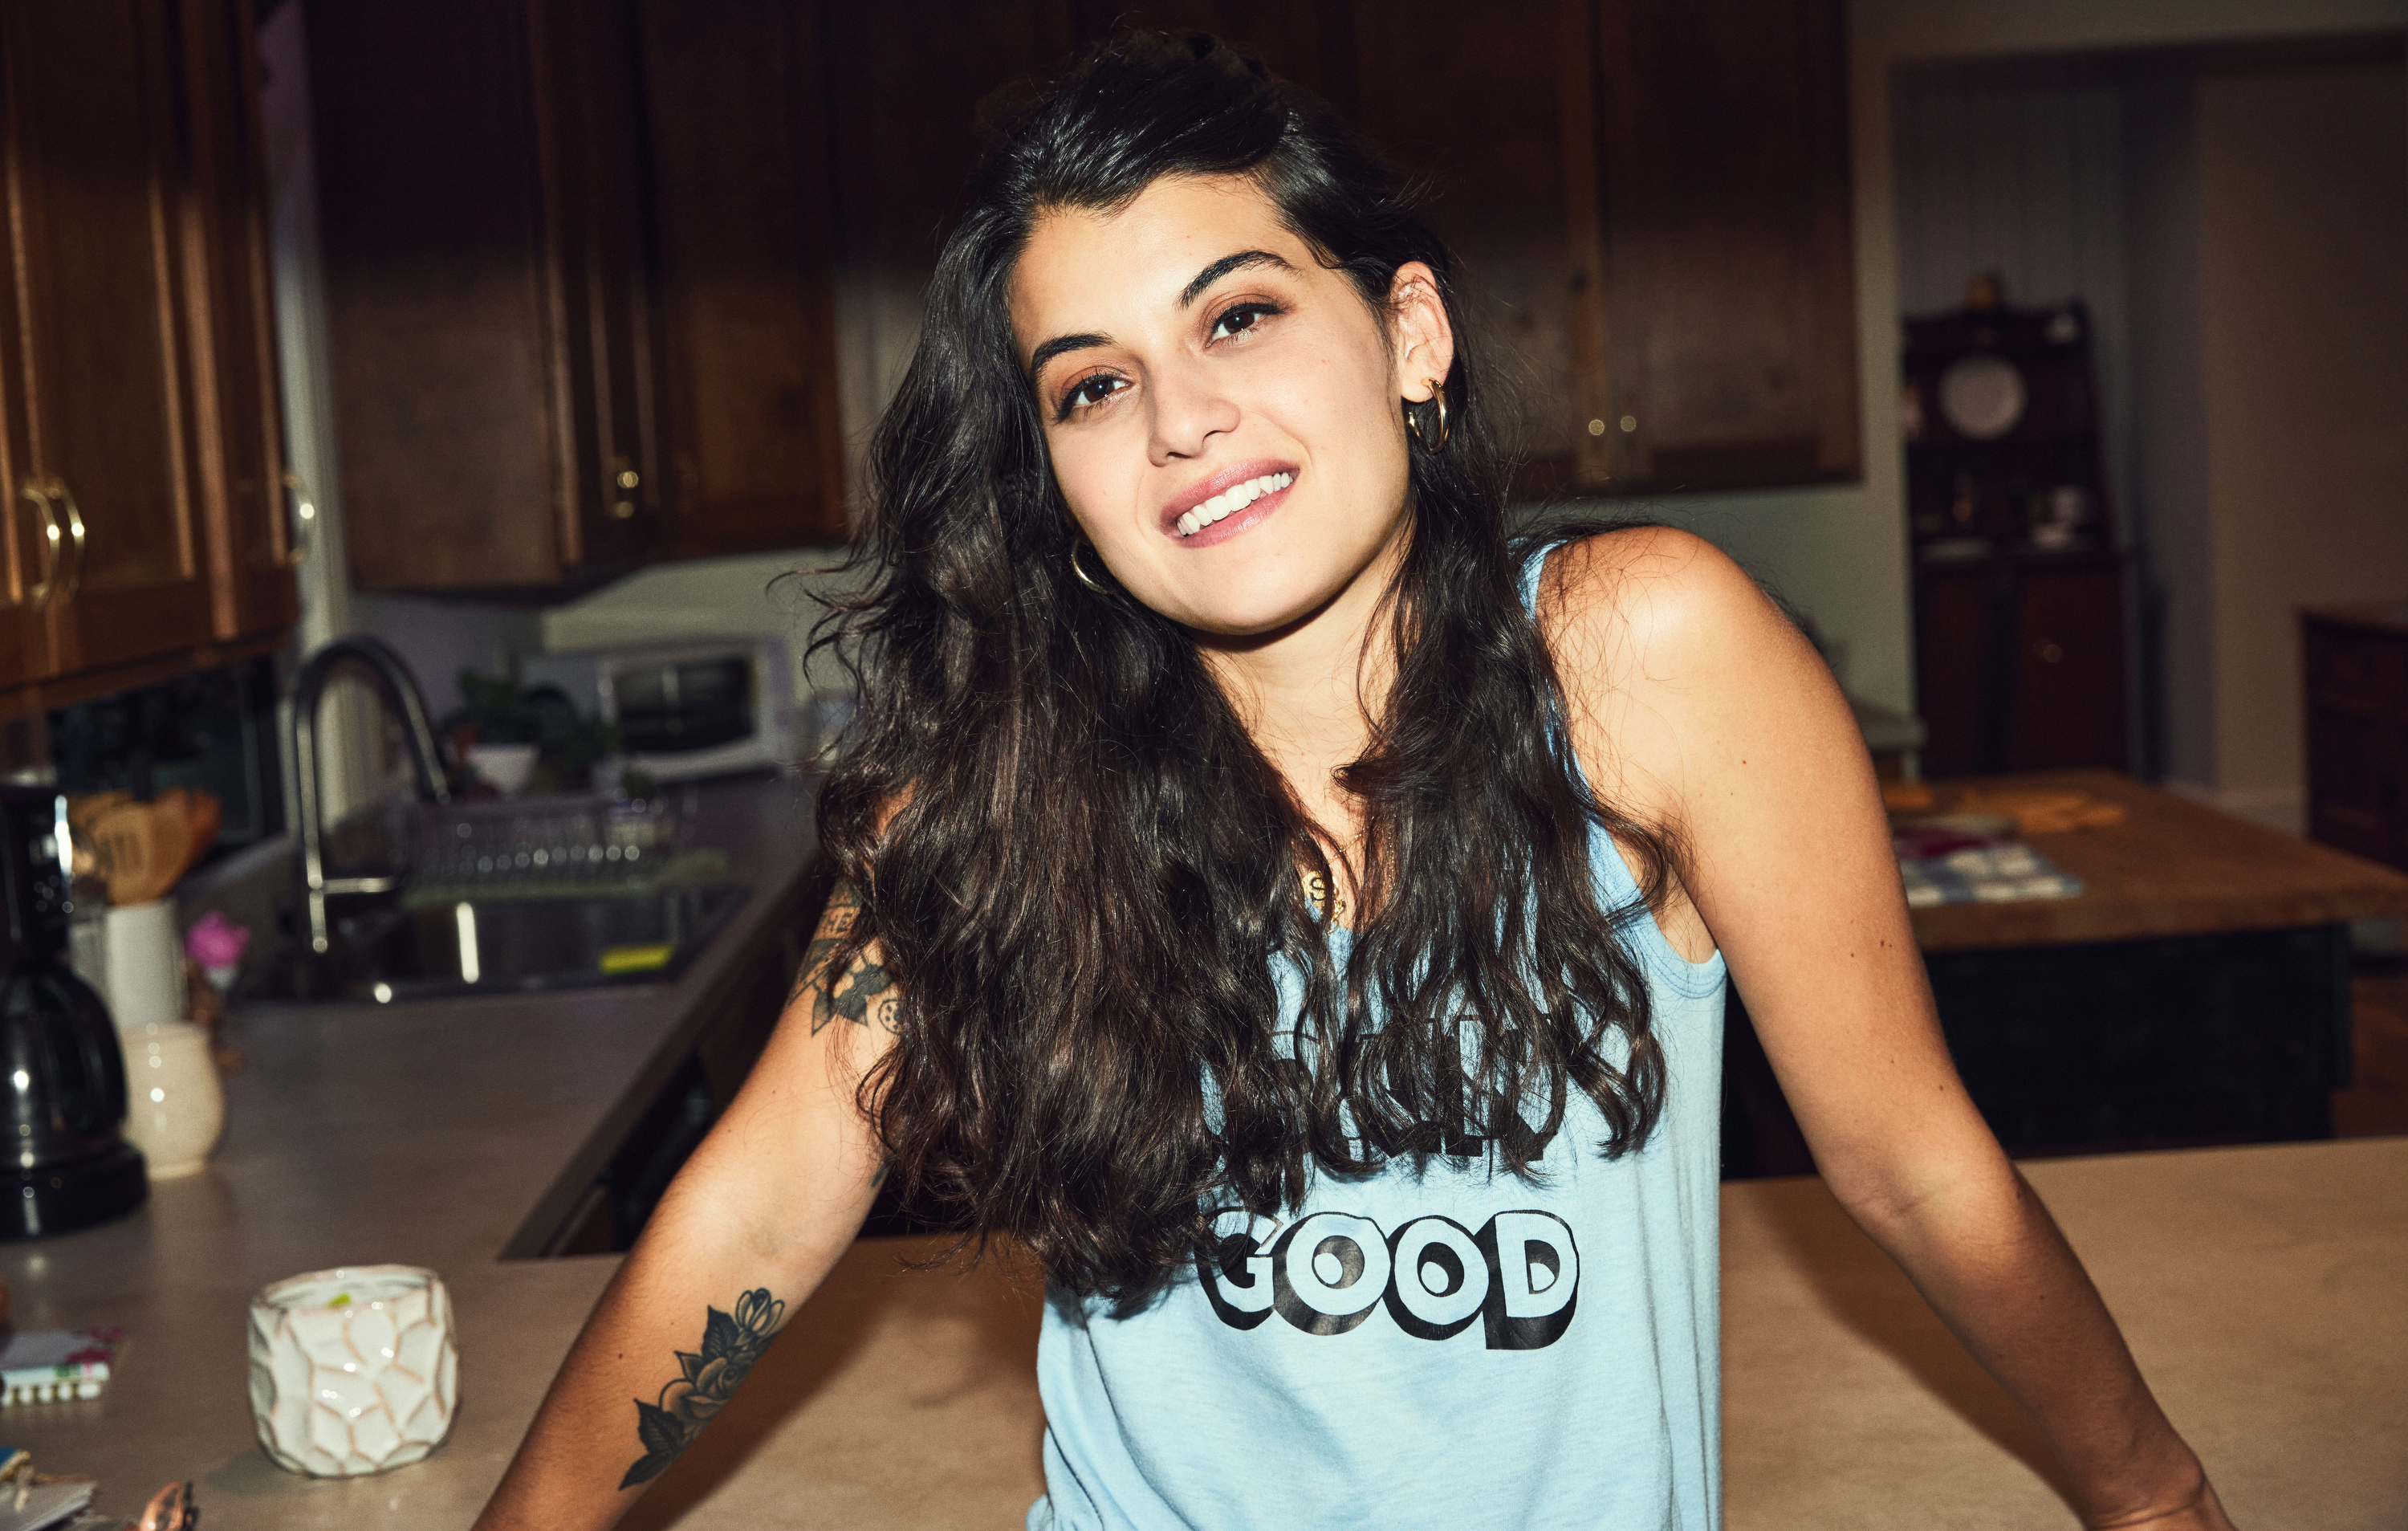 Single Drunk Female star Sofia Black-DElia on recovery, addiction and her image